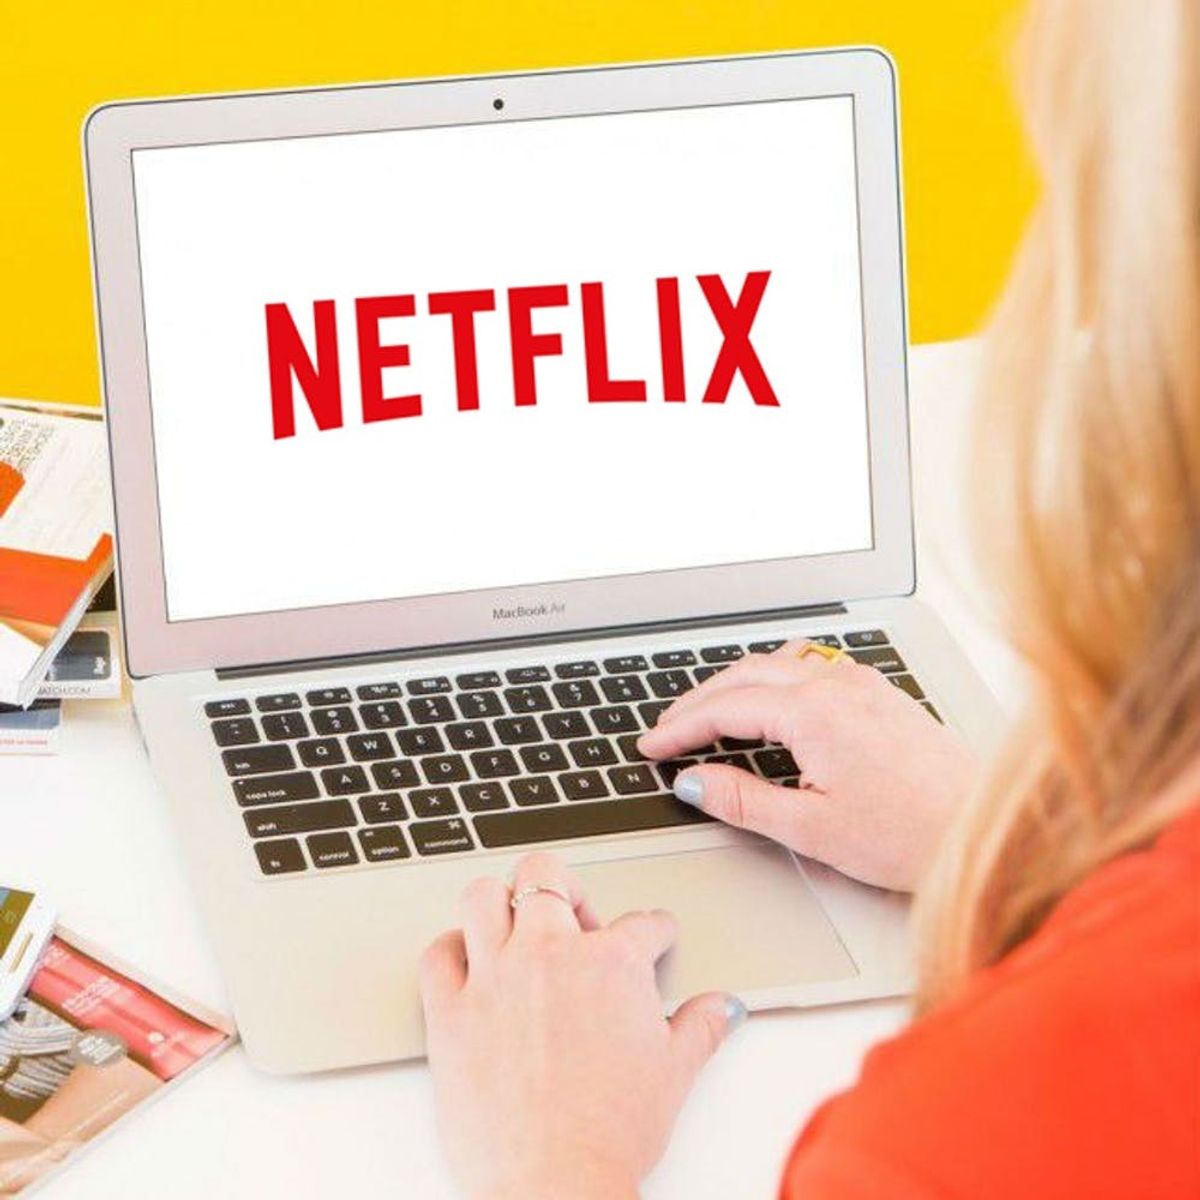 Netflix Is Streaming an Early New Year’s Countdown So Parents Can Trick Kids